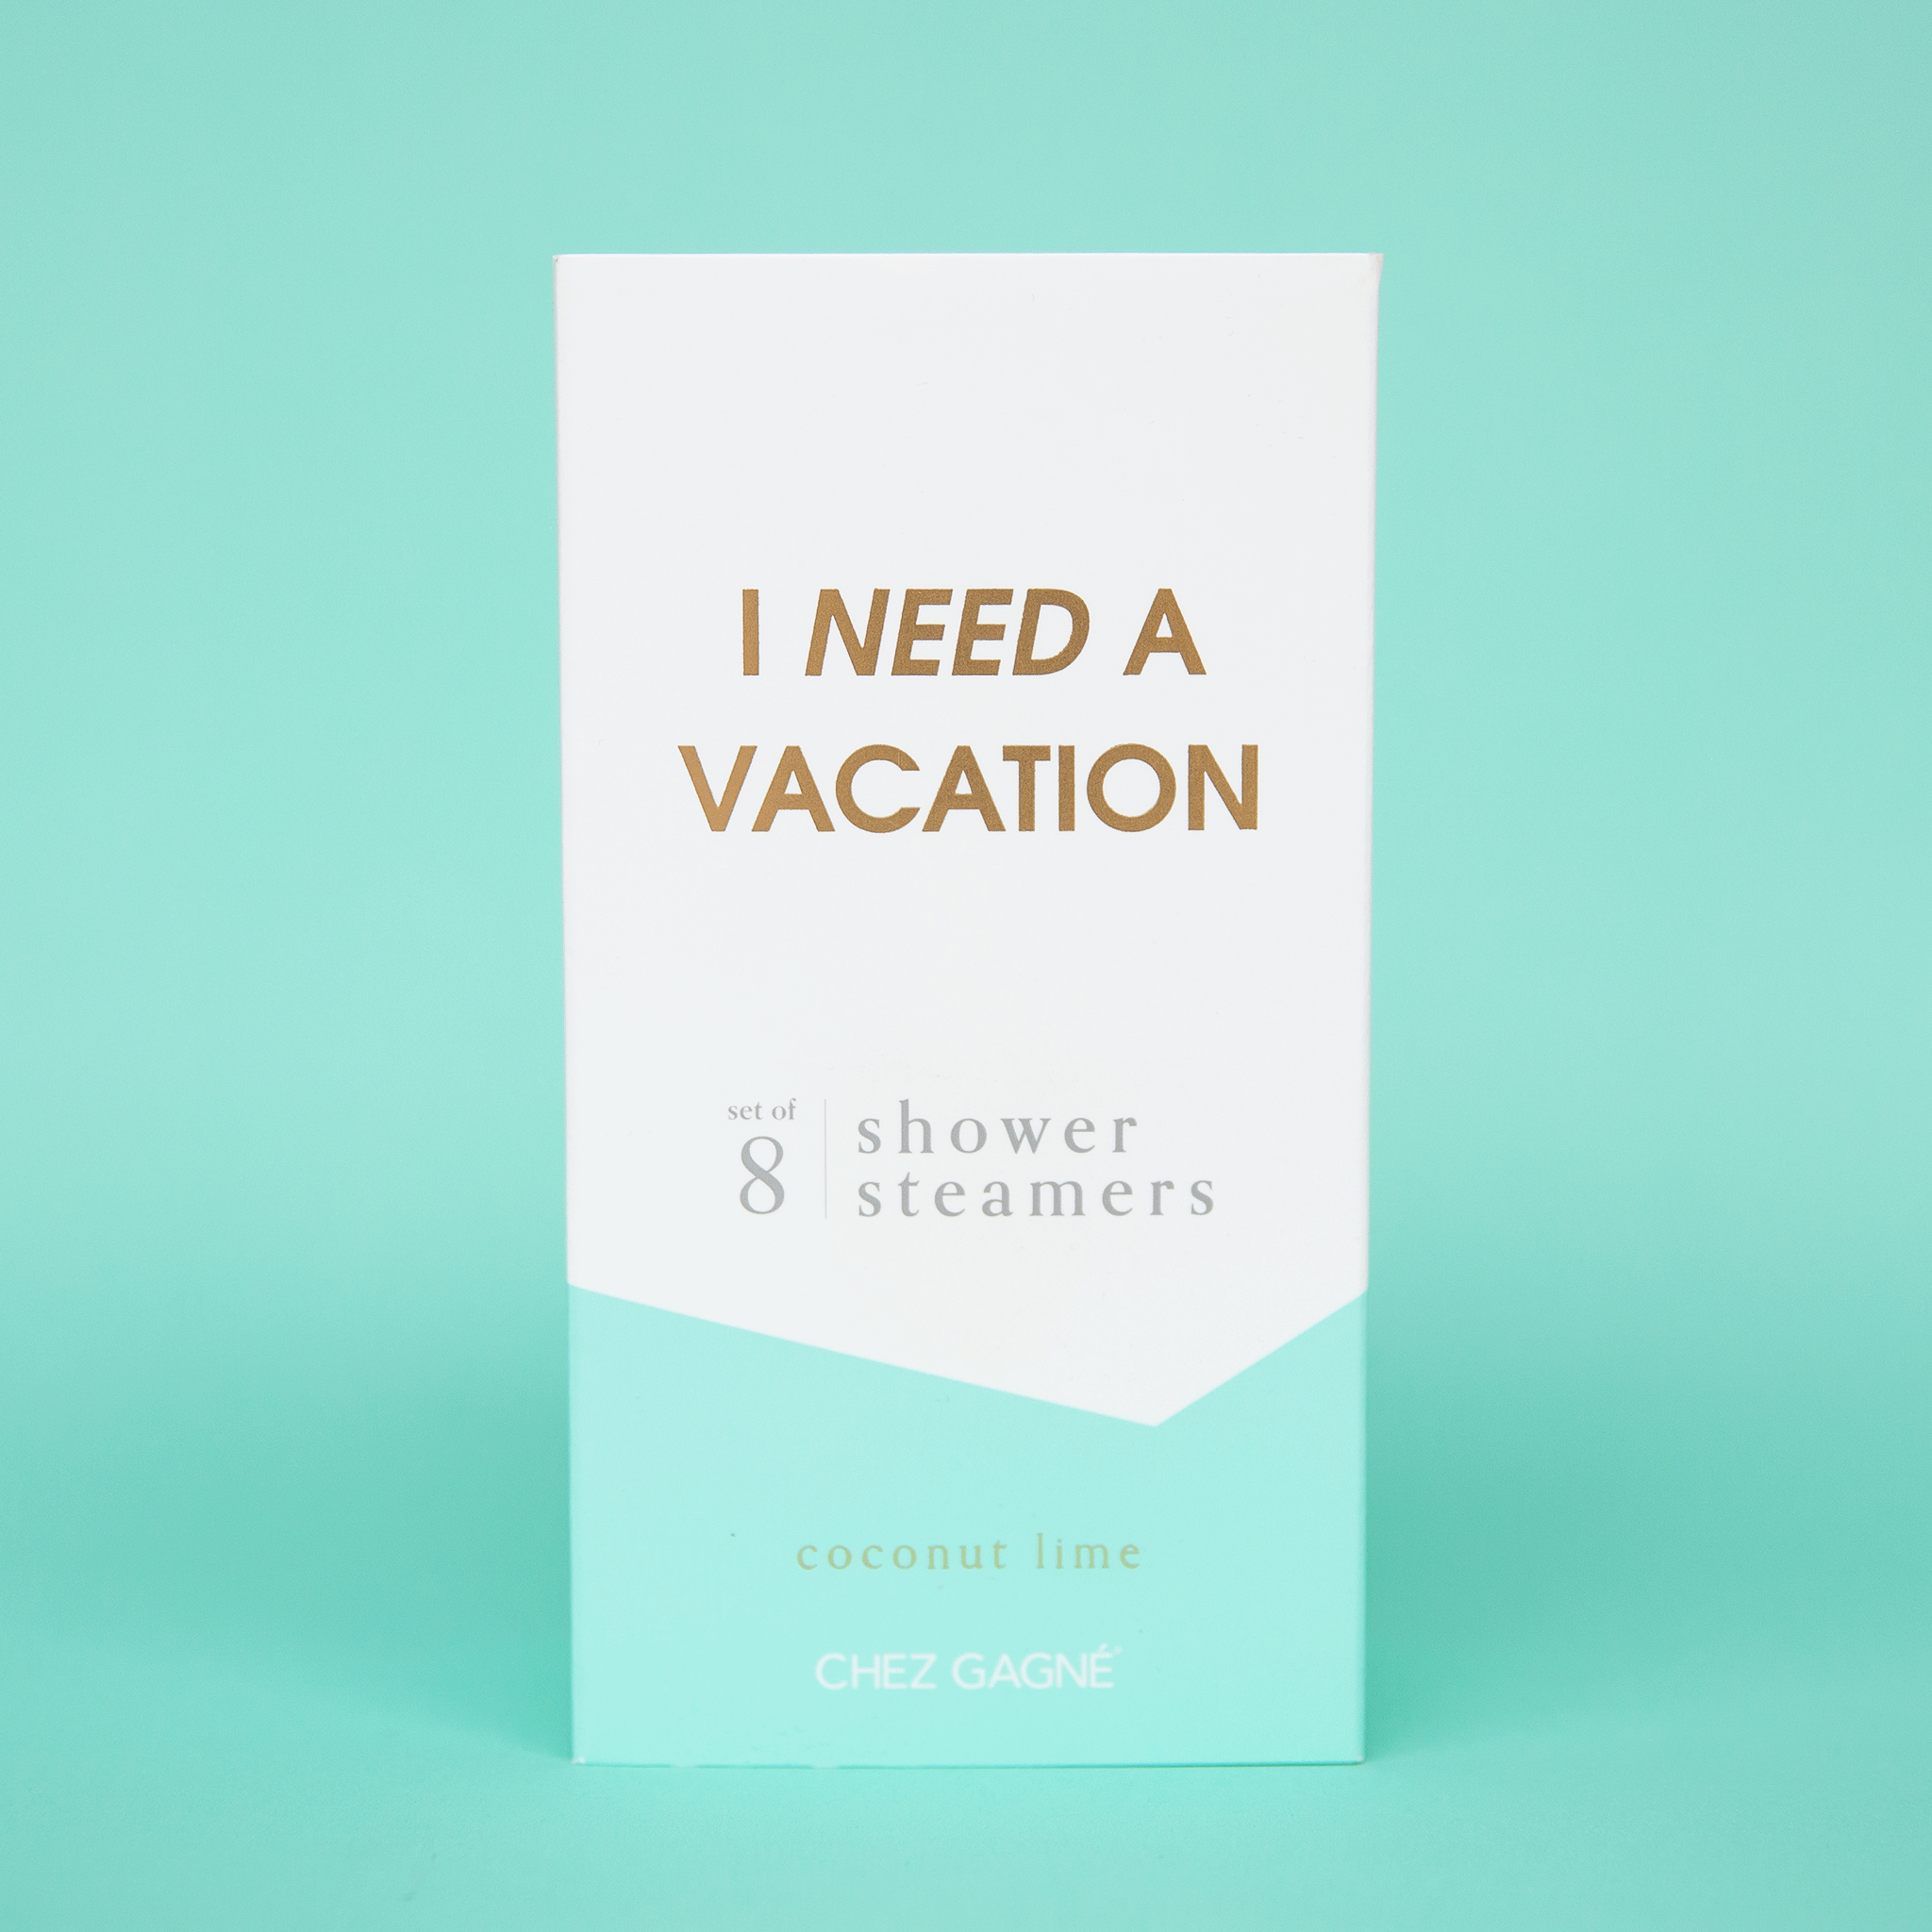 Eight white shower steaming tablets placed inside of a cardboard packaging that is teal blue and white and reads, "I Need A Vacation" in gold text.